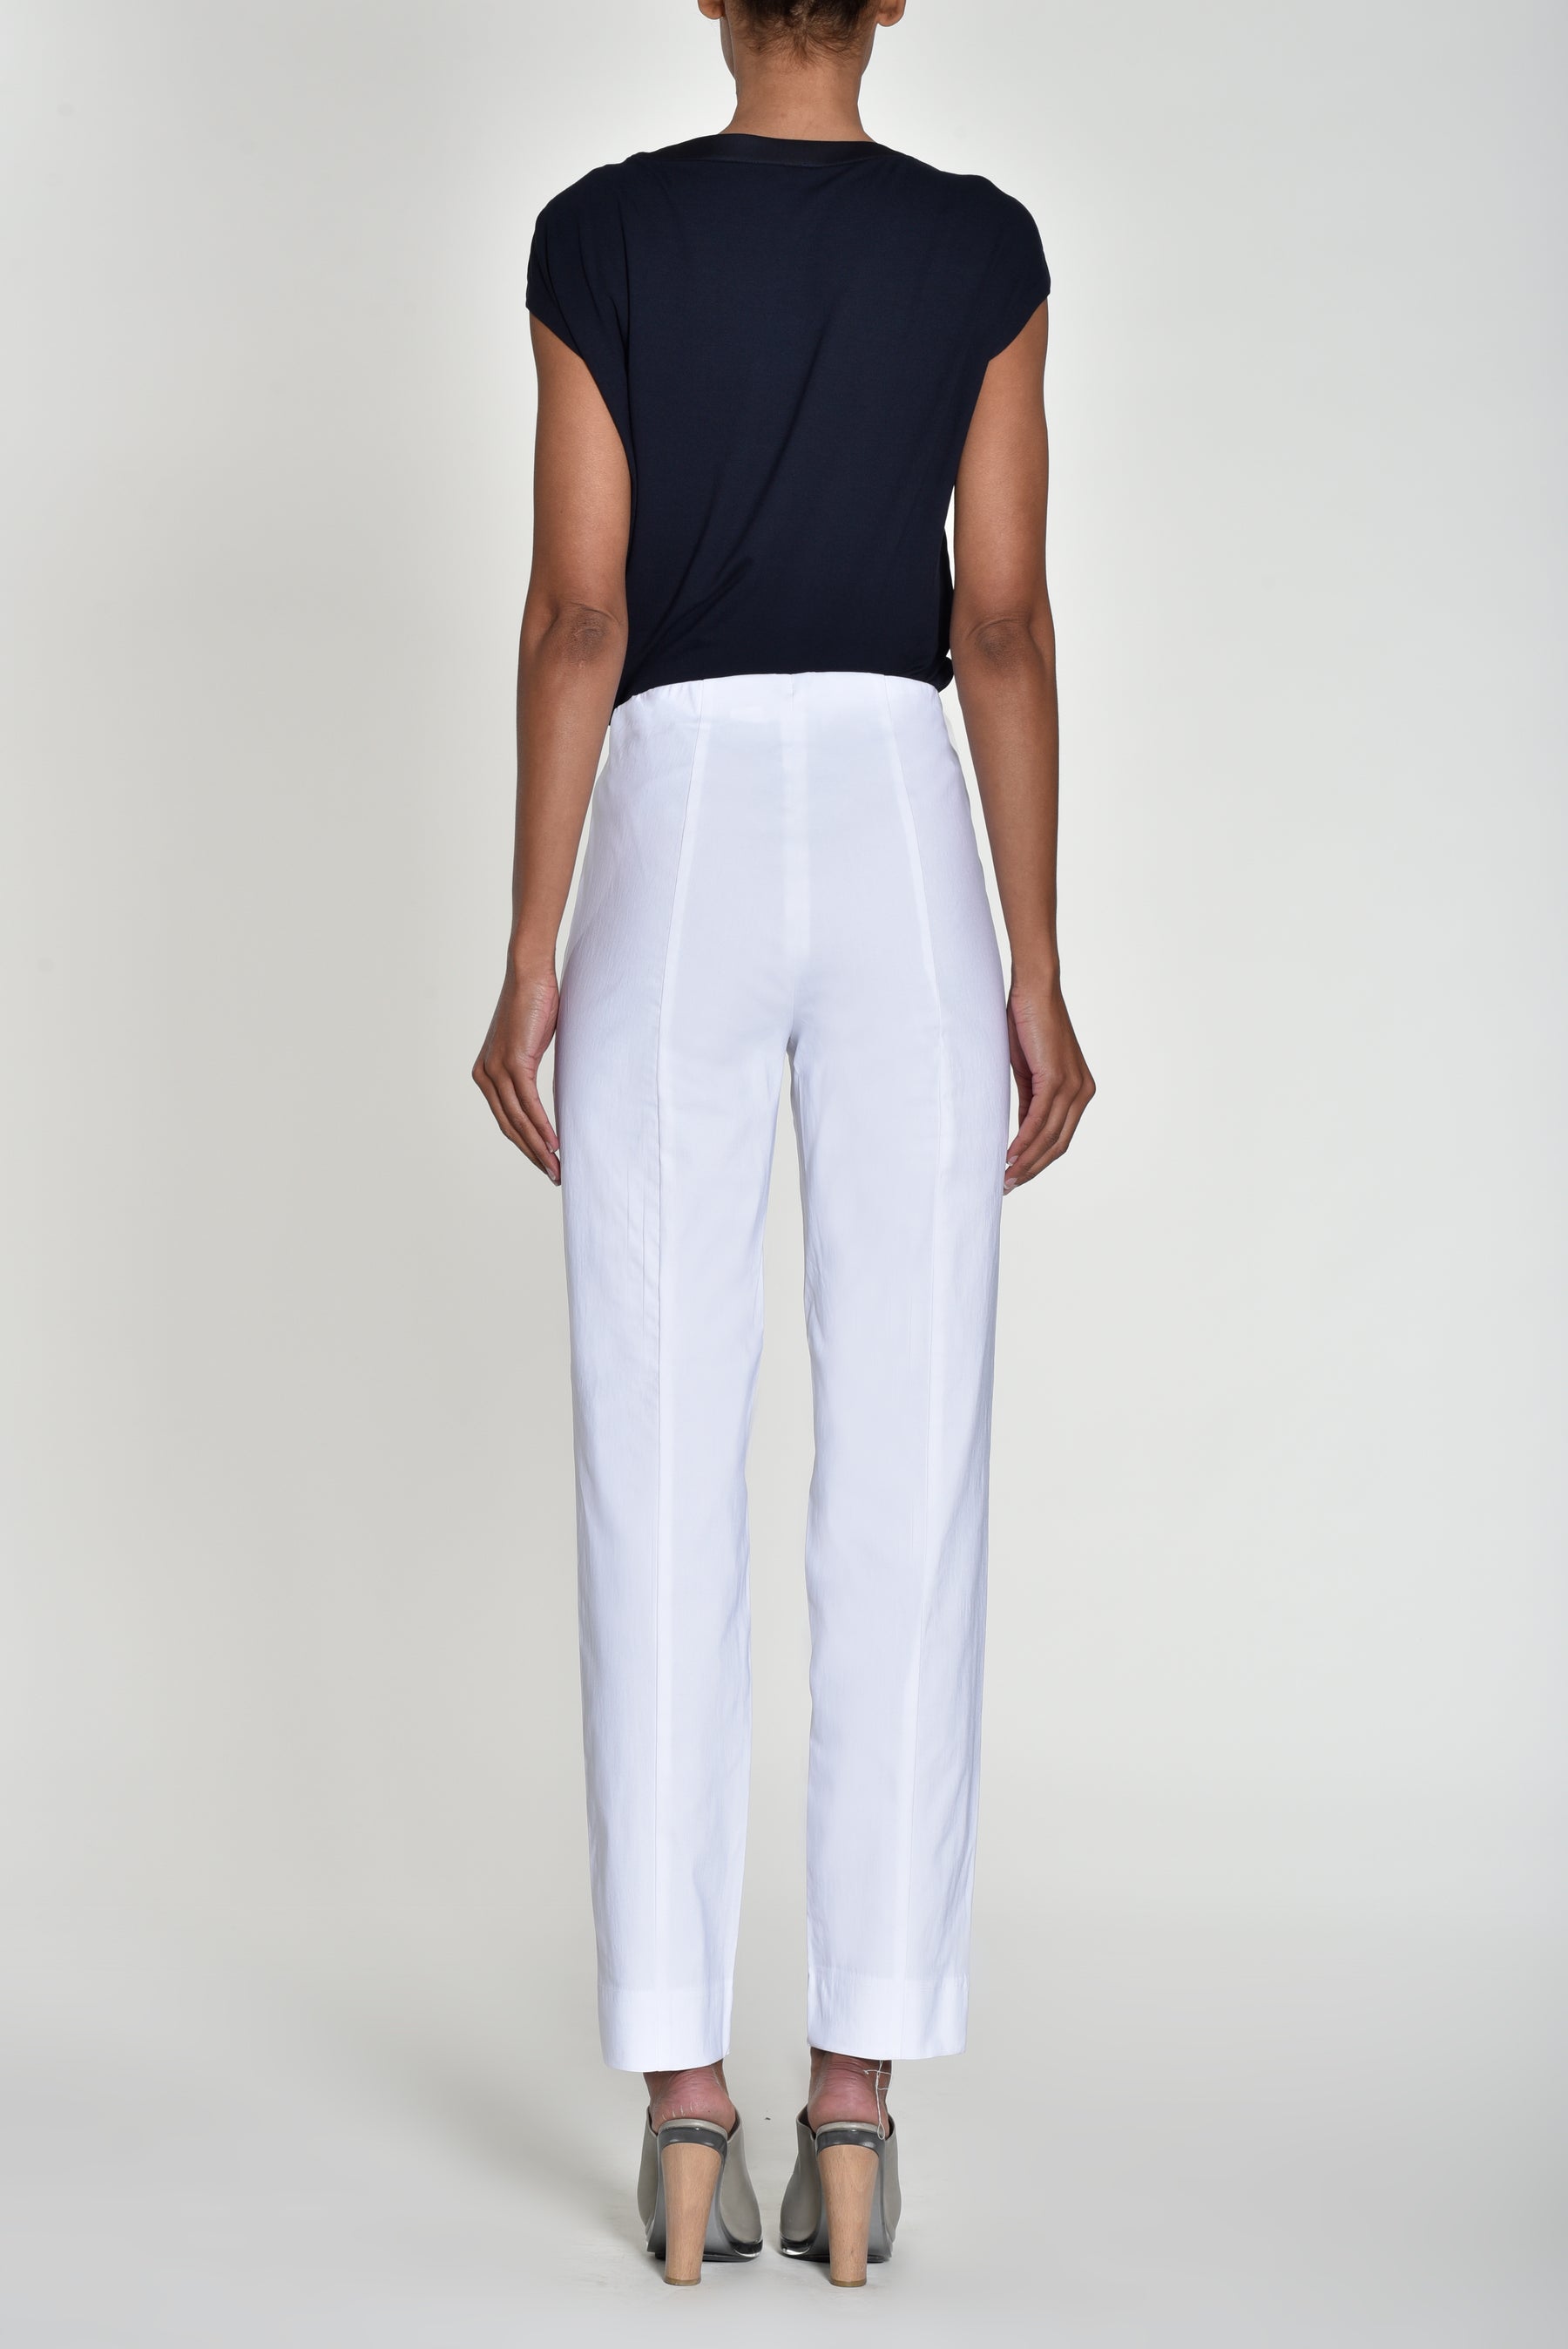 Robell Marie Trousers in White